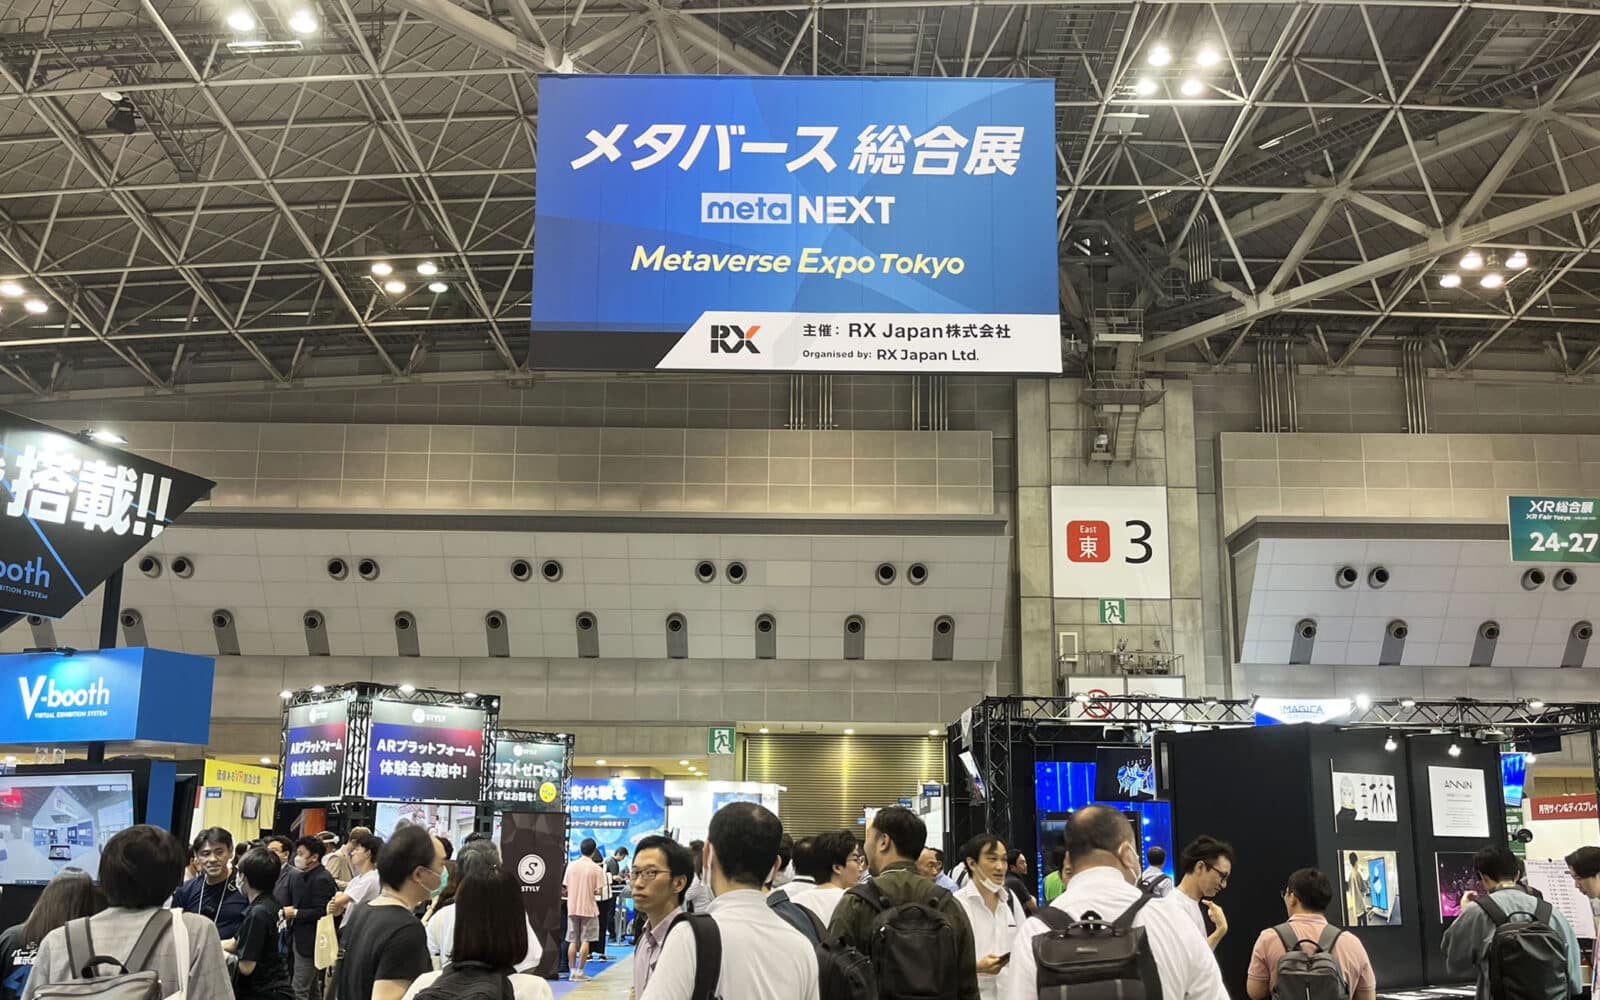 The Metaverse Expo Tokyo: Exhibition Reports